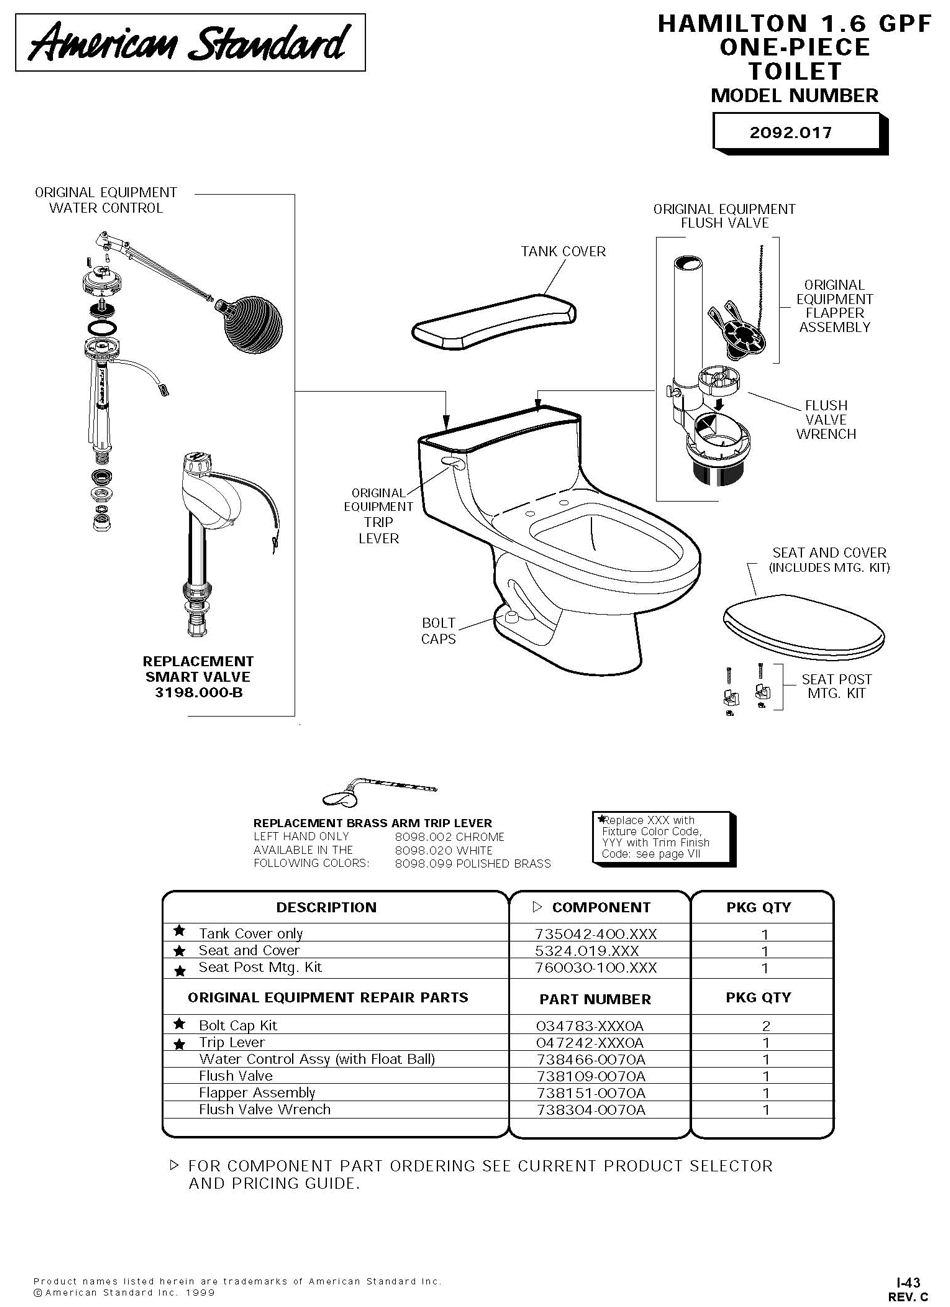 How To Find American Standard Toilet Model Number - This is your tank ...